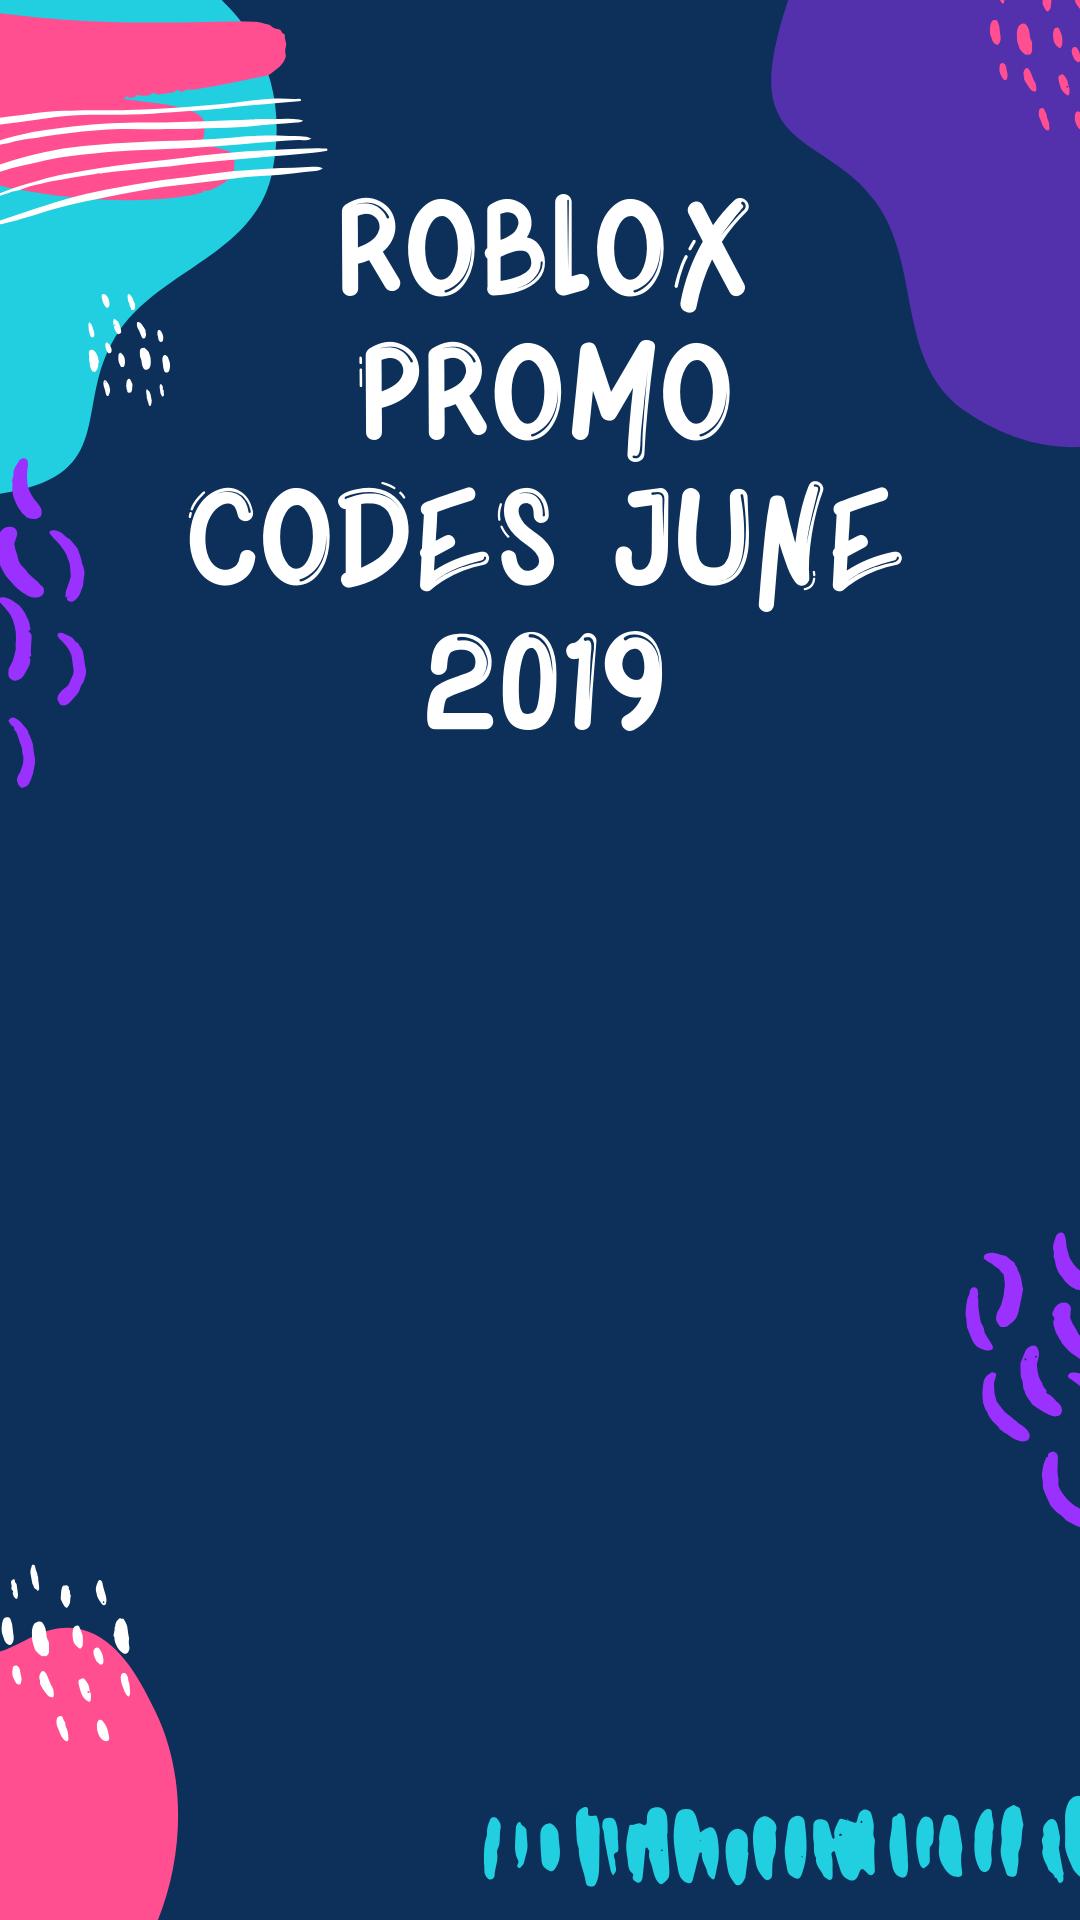 Roblox Promo Codes 2020 On Twitter Roblox Working Promo Code June 2019 Spider Cola Just Enter Promo Code Spidercola Click Here To Get All New Roblox Promo Codes Today S Link Https T Co Co1ltinps5 Robloxnew - all working roblox promo codes june 2019